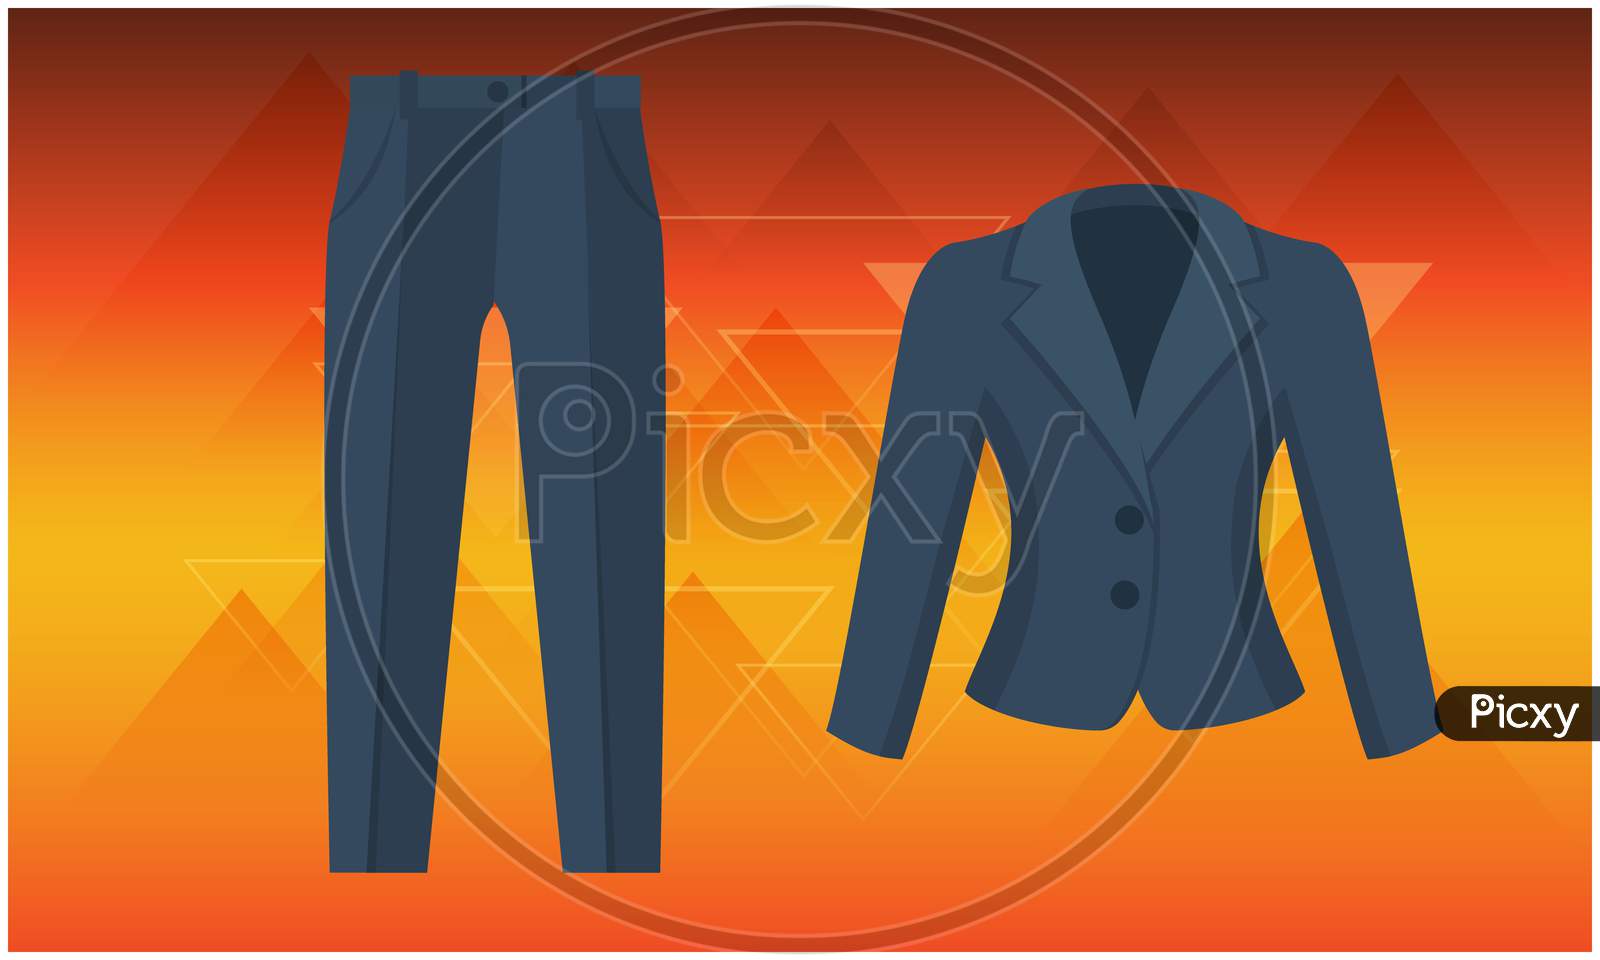 Mock Up Illustration Of Female Office Uniform On Abstract Background